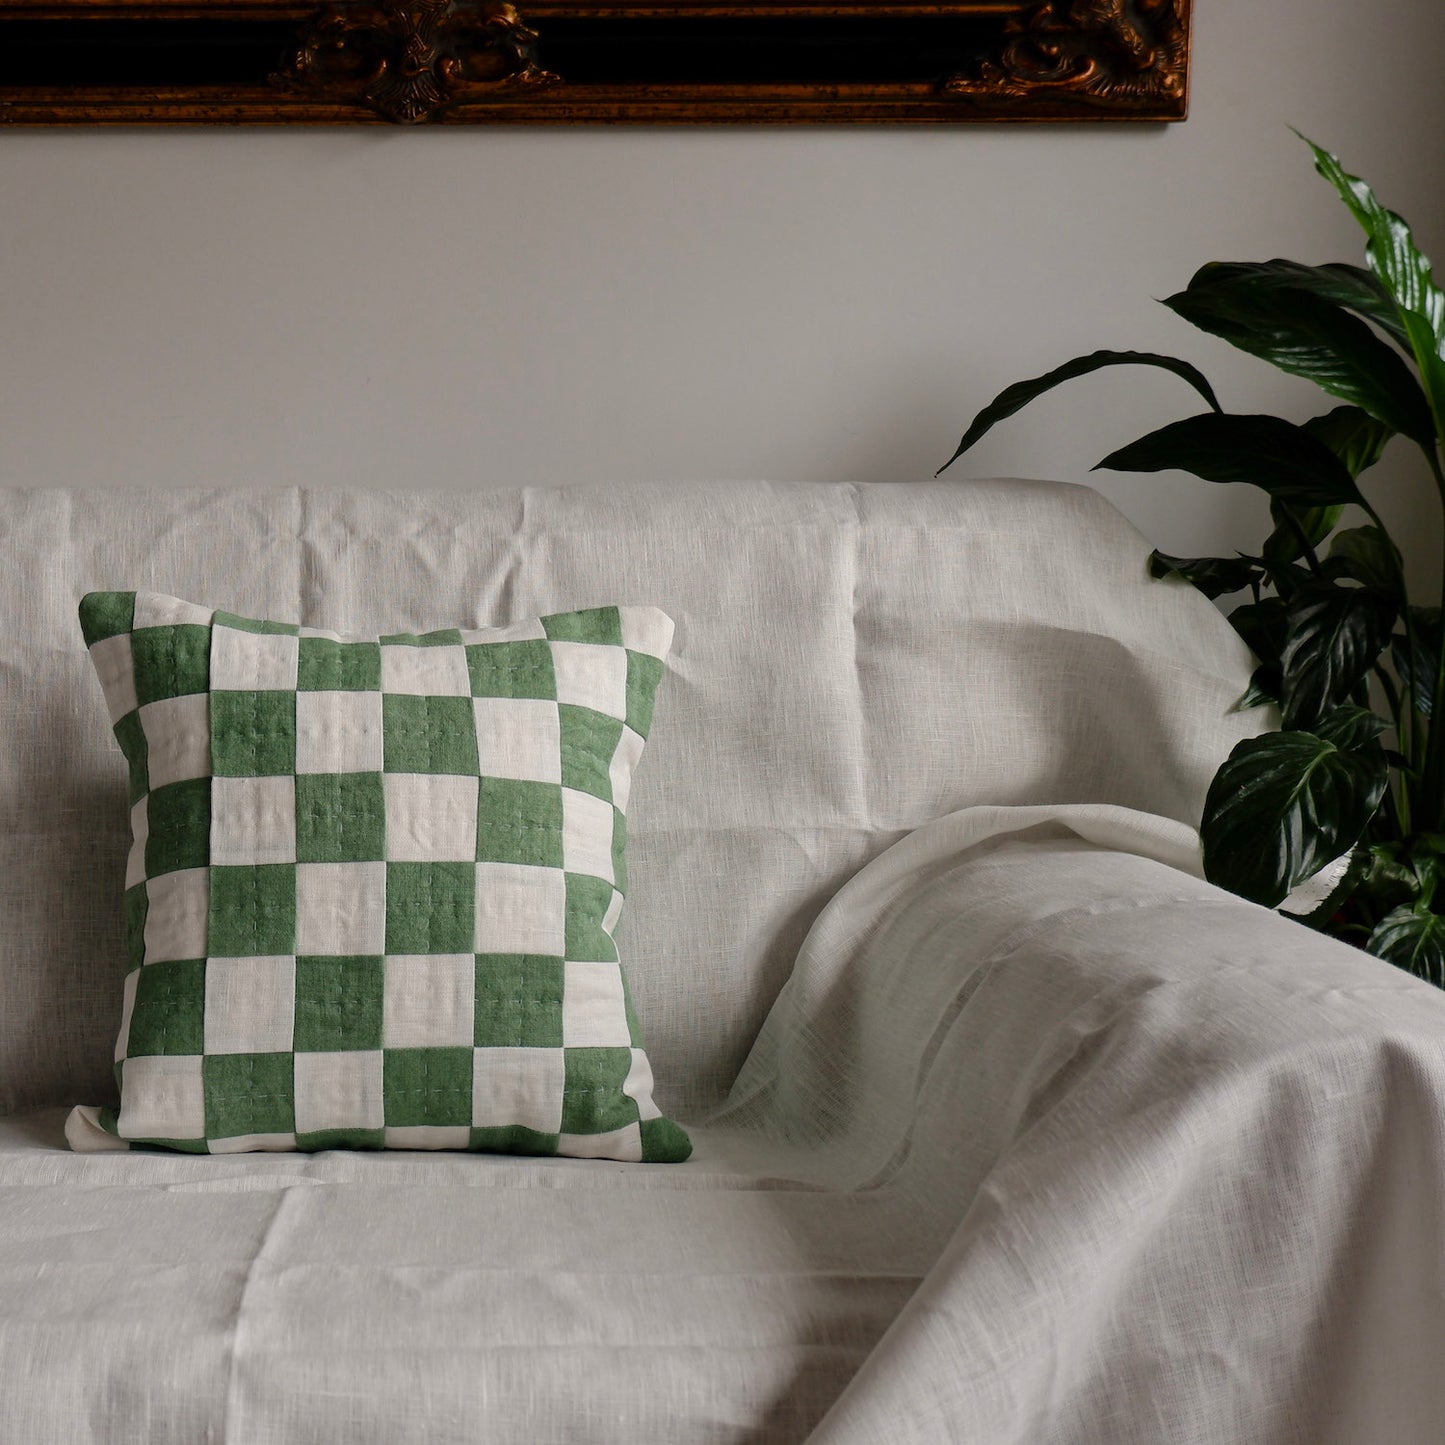 Green chequered cushion made with naturally-dyed linen